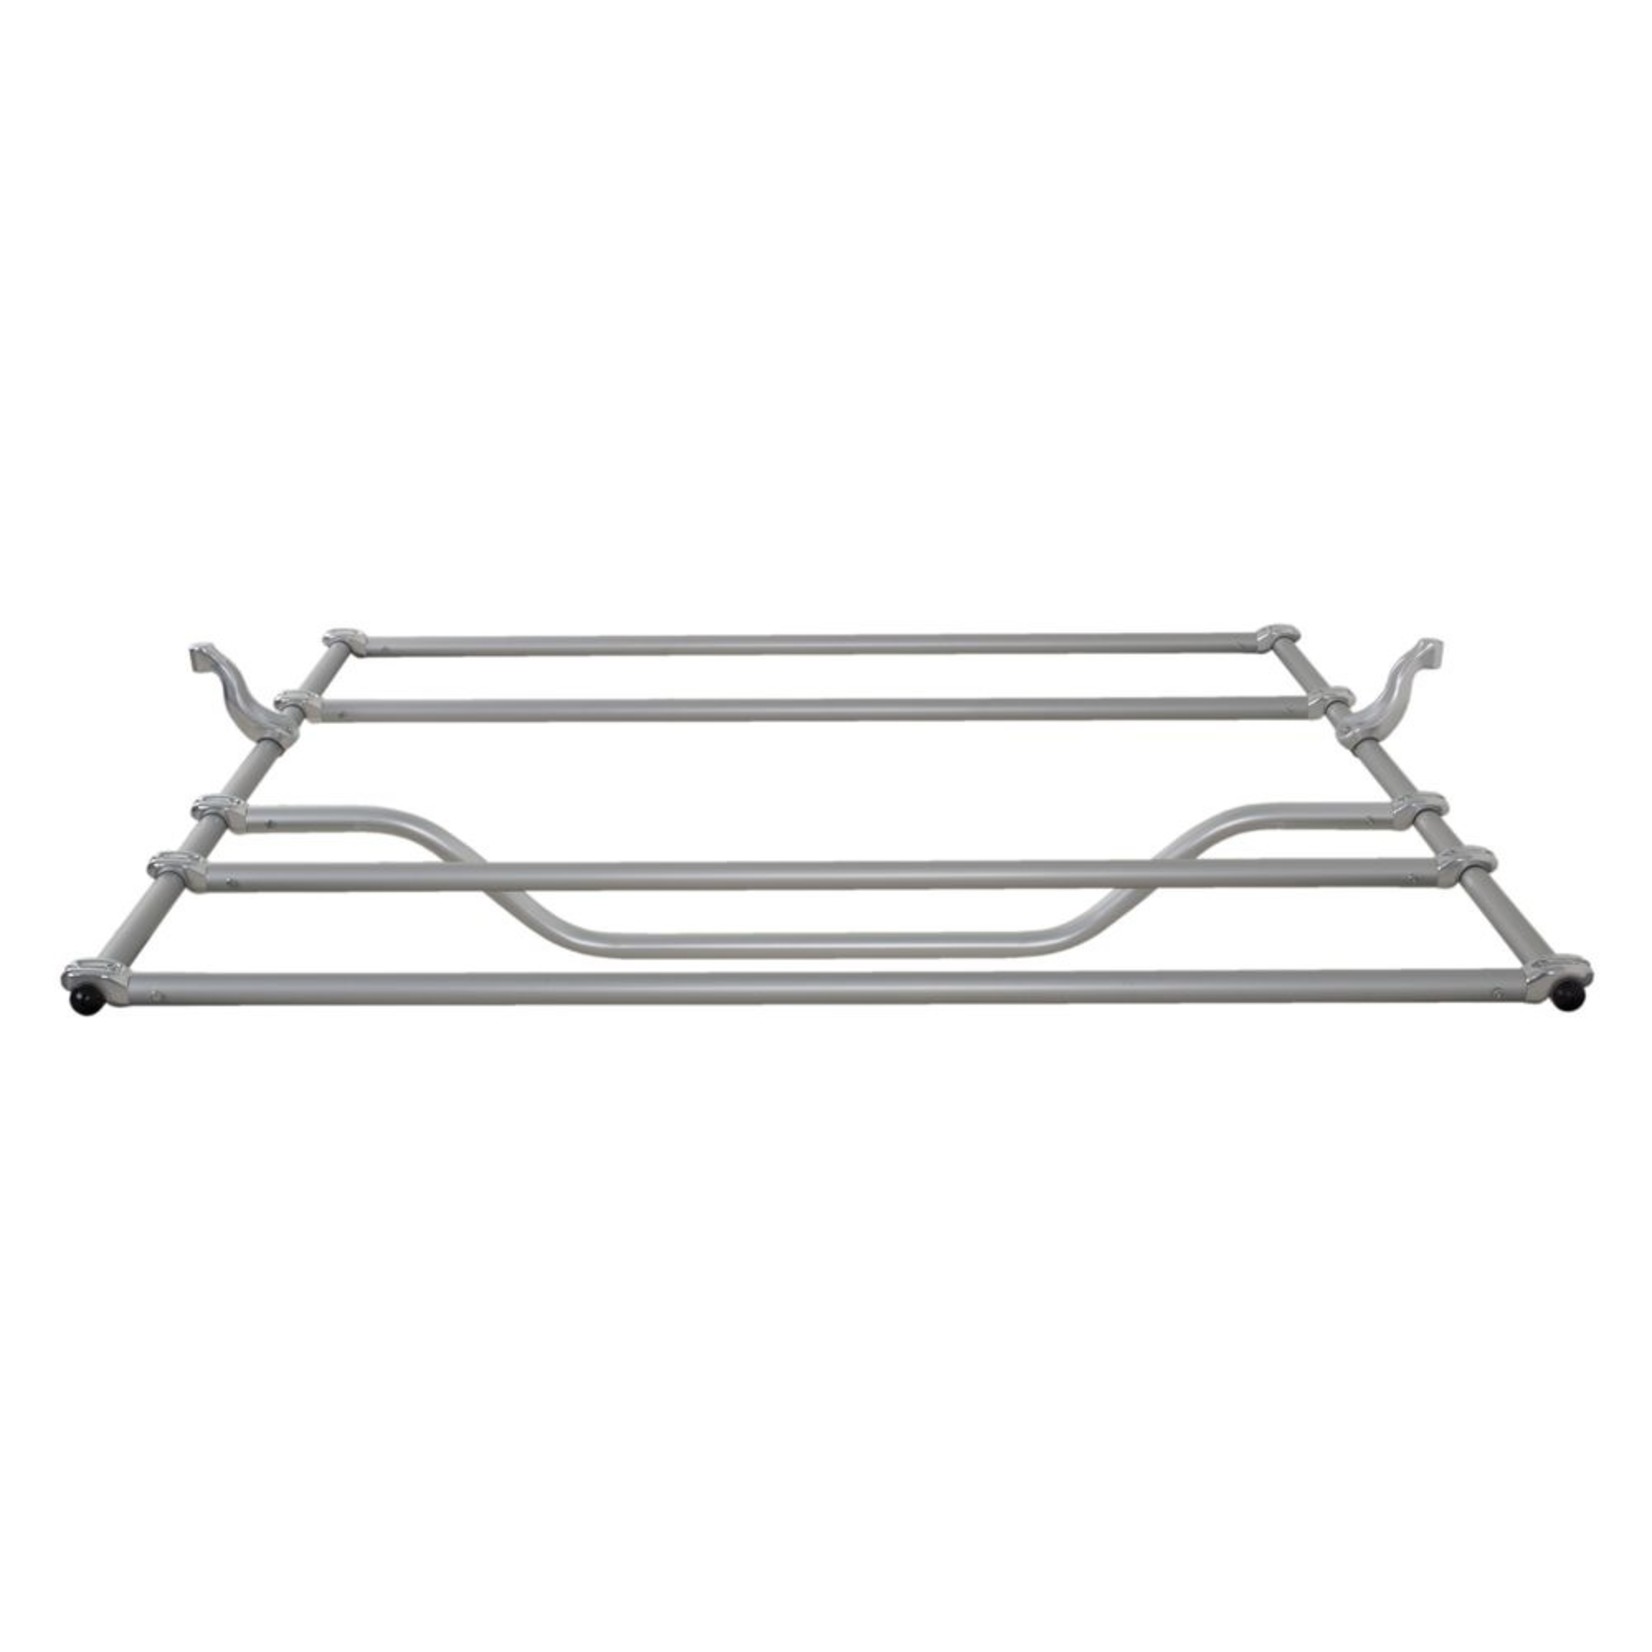 NRS NRS Compact Outfitter Raft Frame